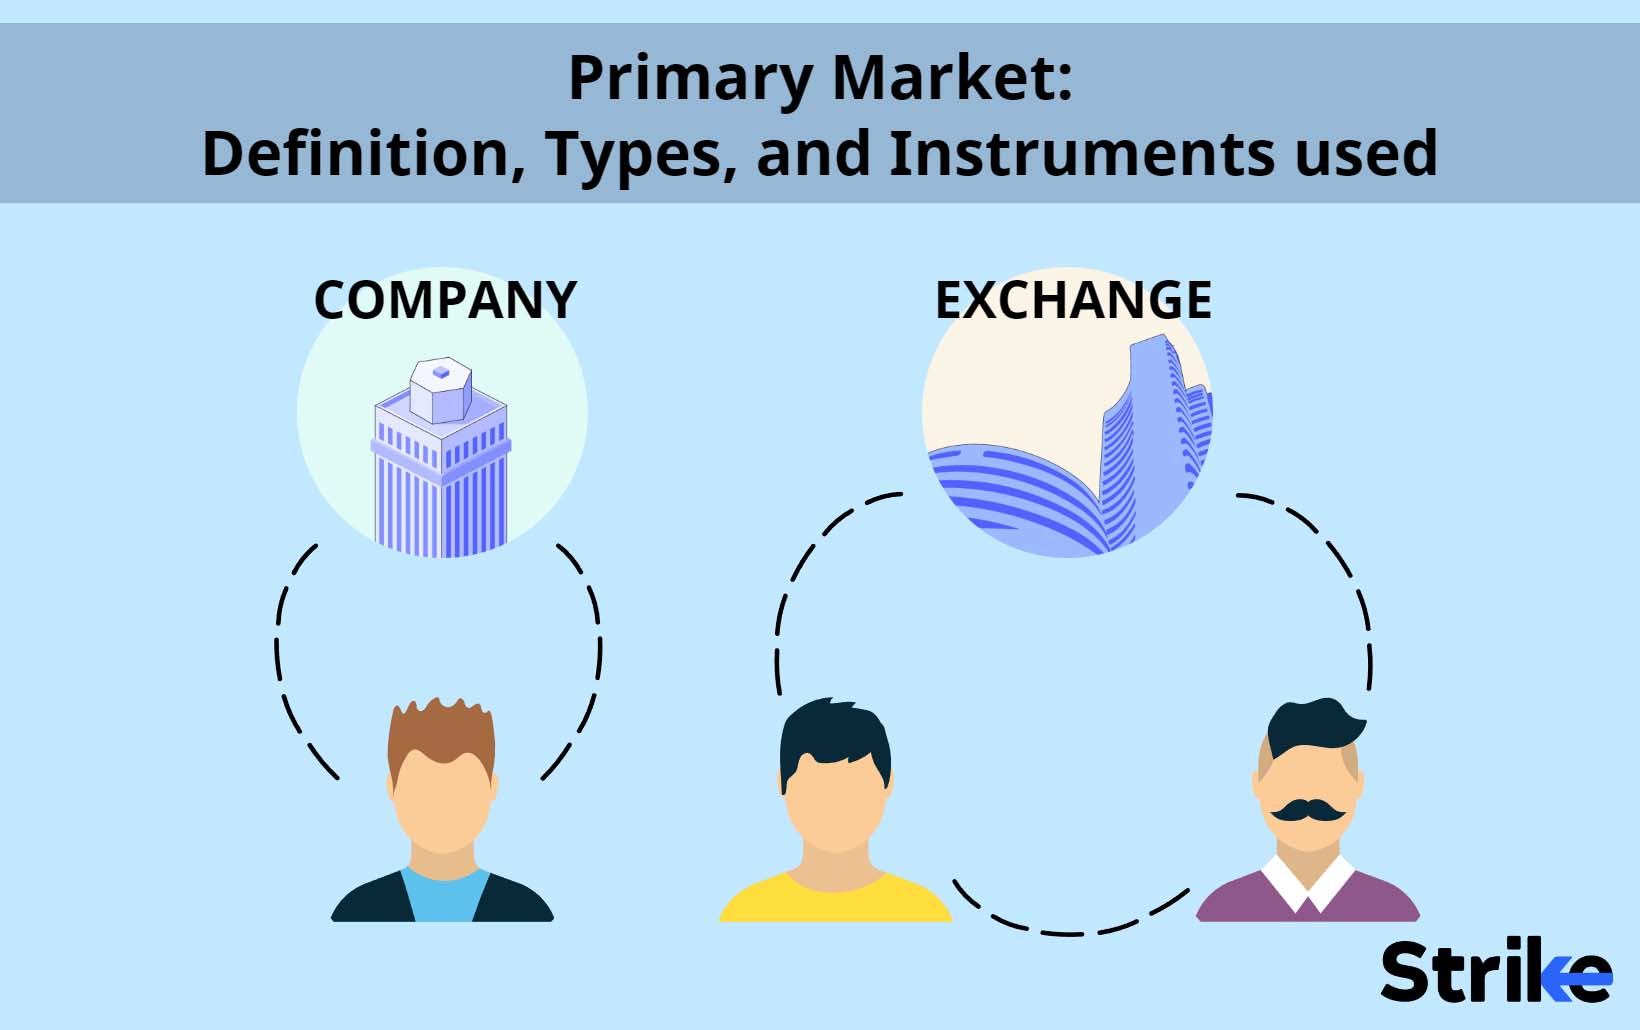 Primary Market: Definition, Types, and Instruments Used